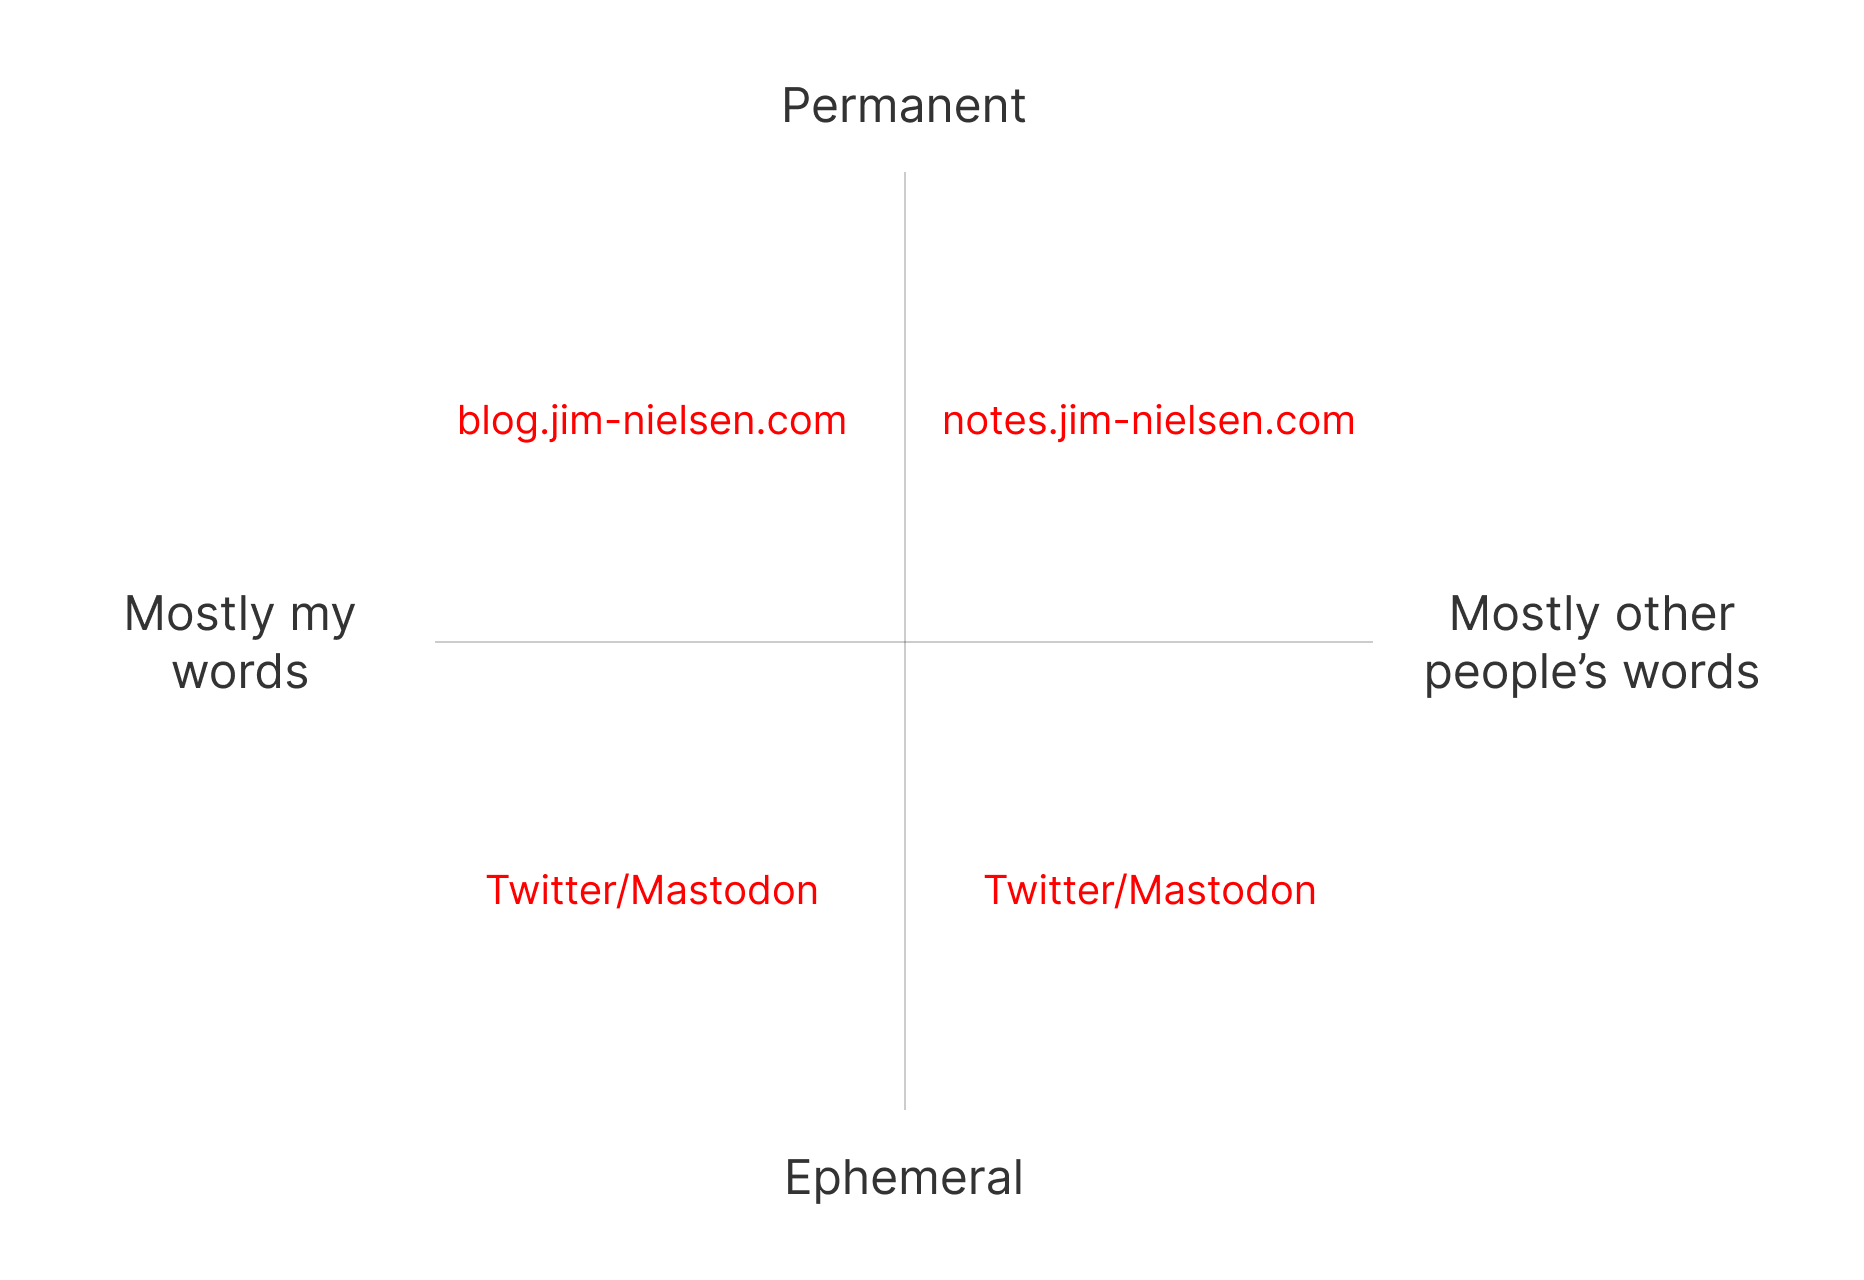 A quadrant with “Permancence” as the north label, “Mostly other people’s words” as the east label, “Ephemeral” as the south label, and “Mostly my words” as the west labe. In the upper left is `blog.jim-nielsen.com`, upper right is `notes.jim-nielsen.com` and the two lower quadrants are both “twitter/mastodon”.